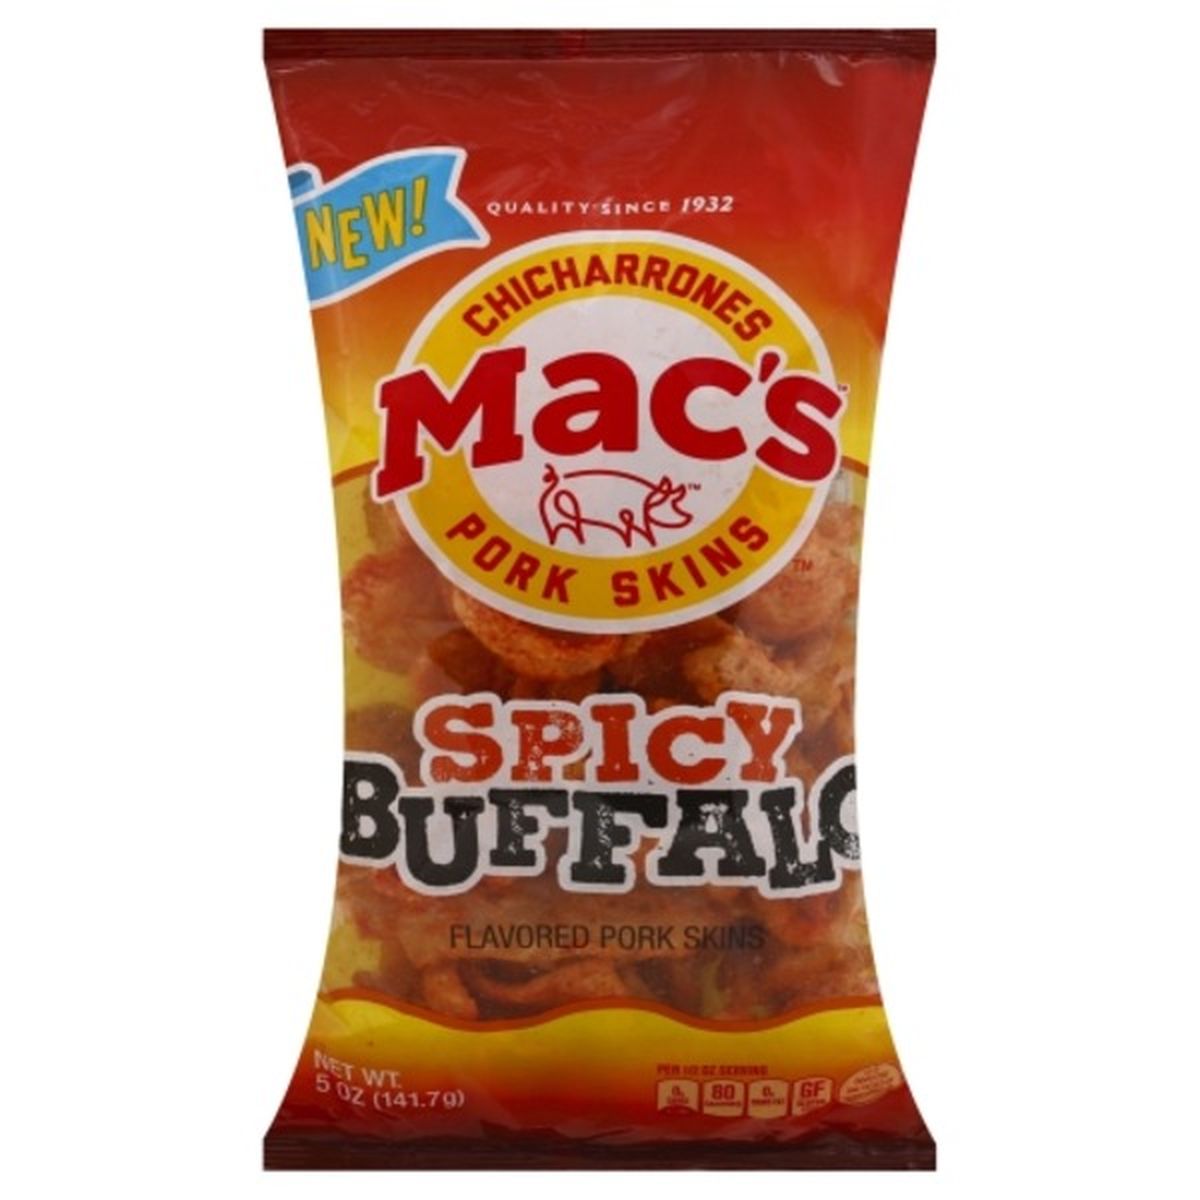 Calories in Macs Pork Skins, Fried, Spicy Buffalo Flavored